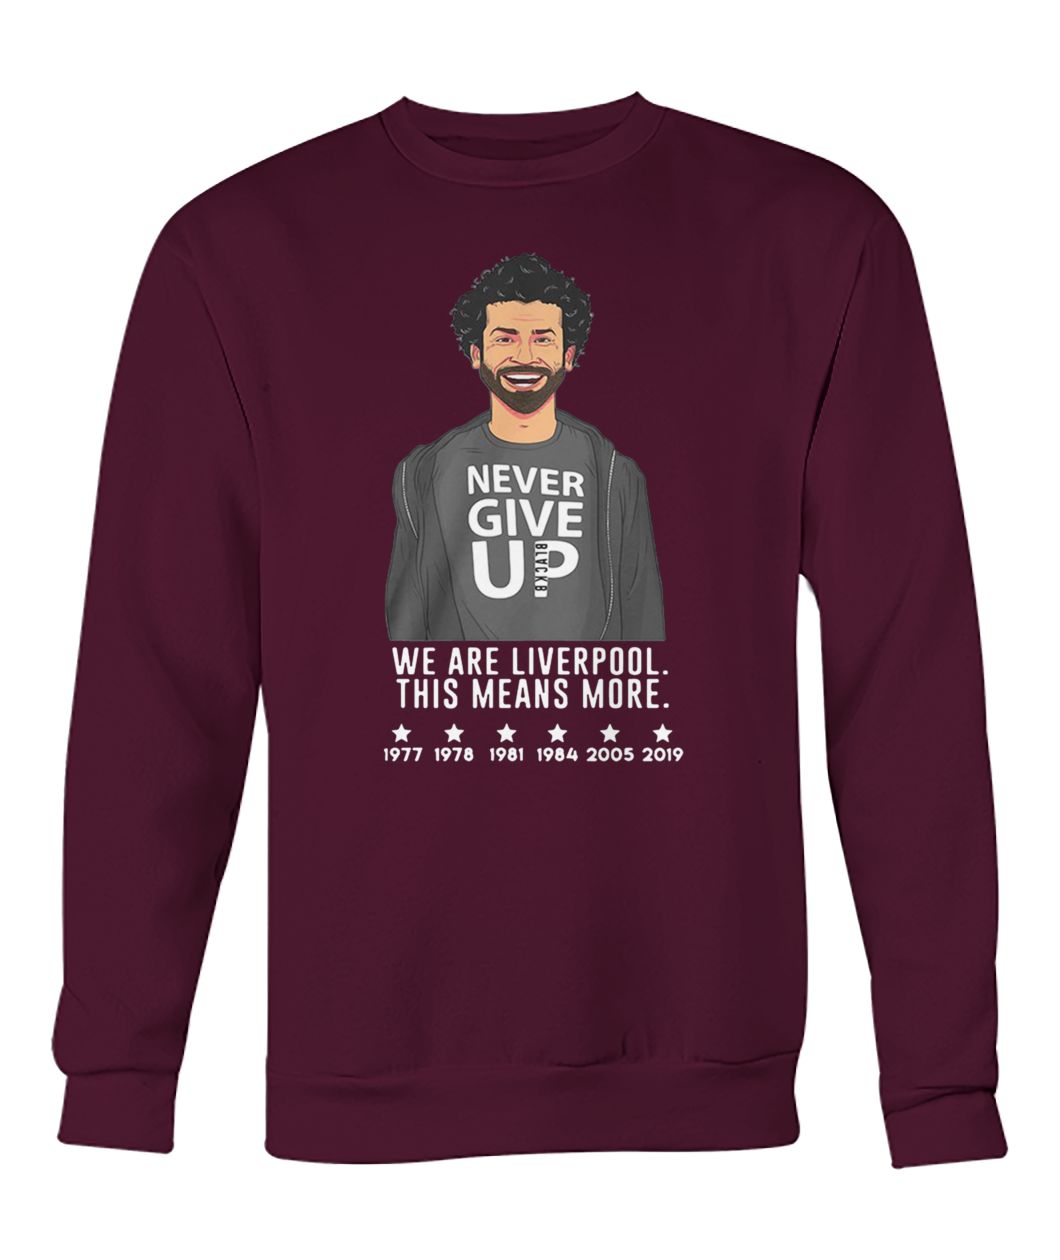 Liverpool mo salah never give up we are liverpool this means more blackb crew neck sweatshirt